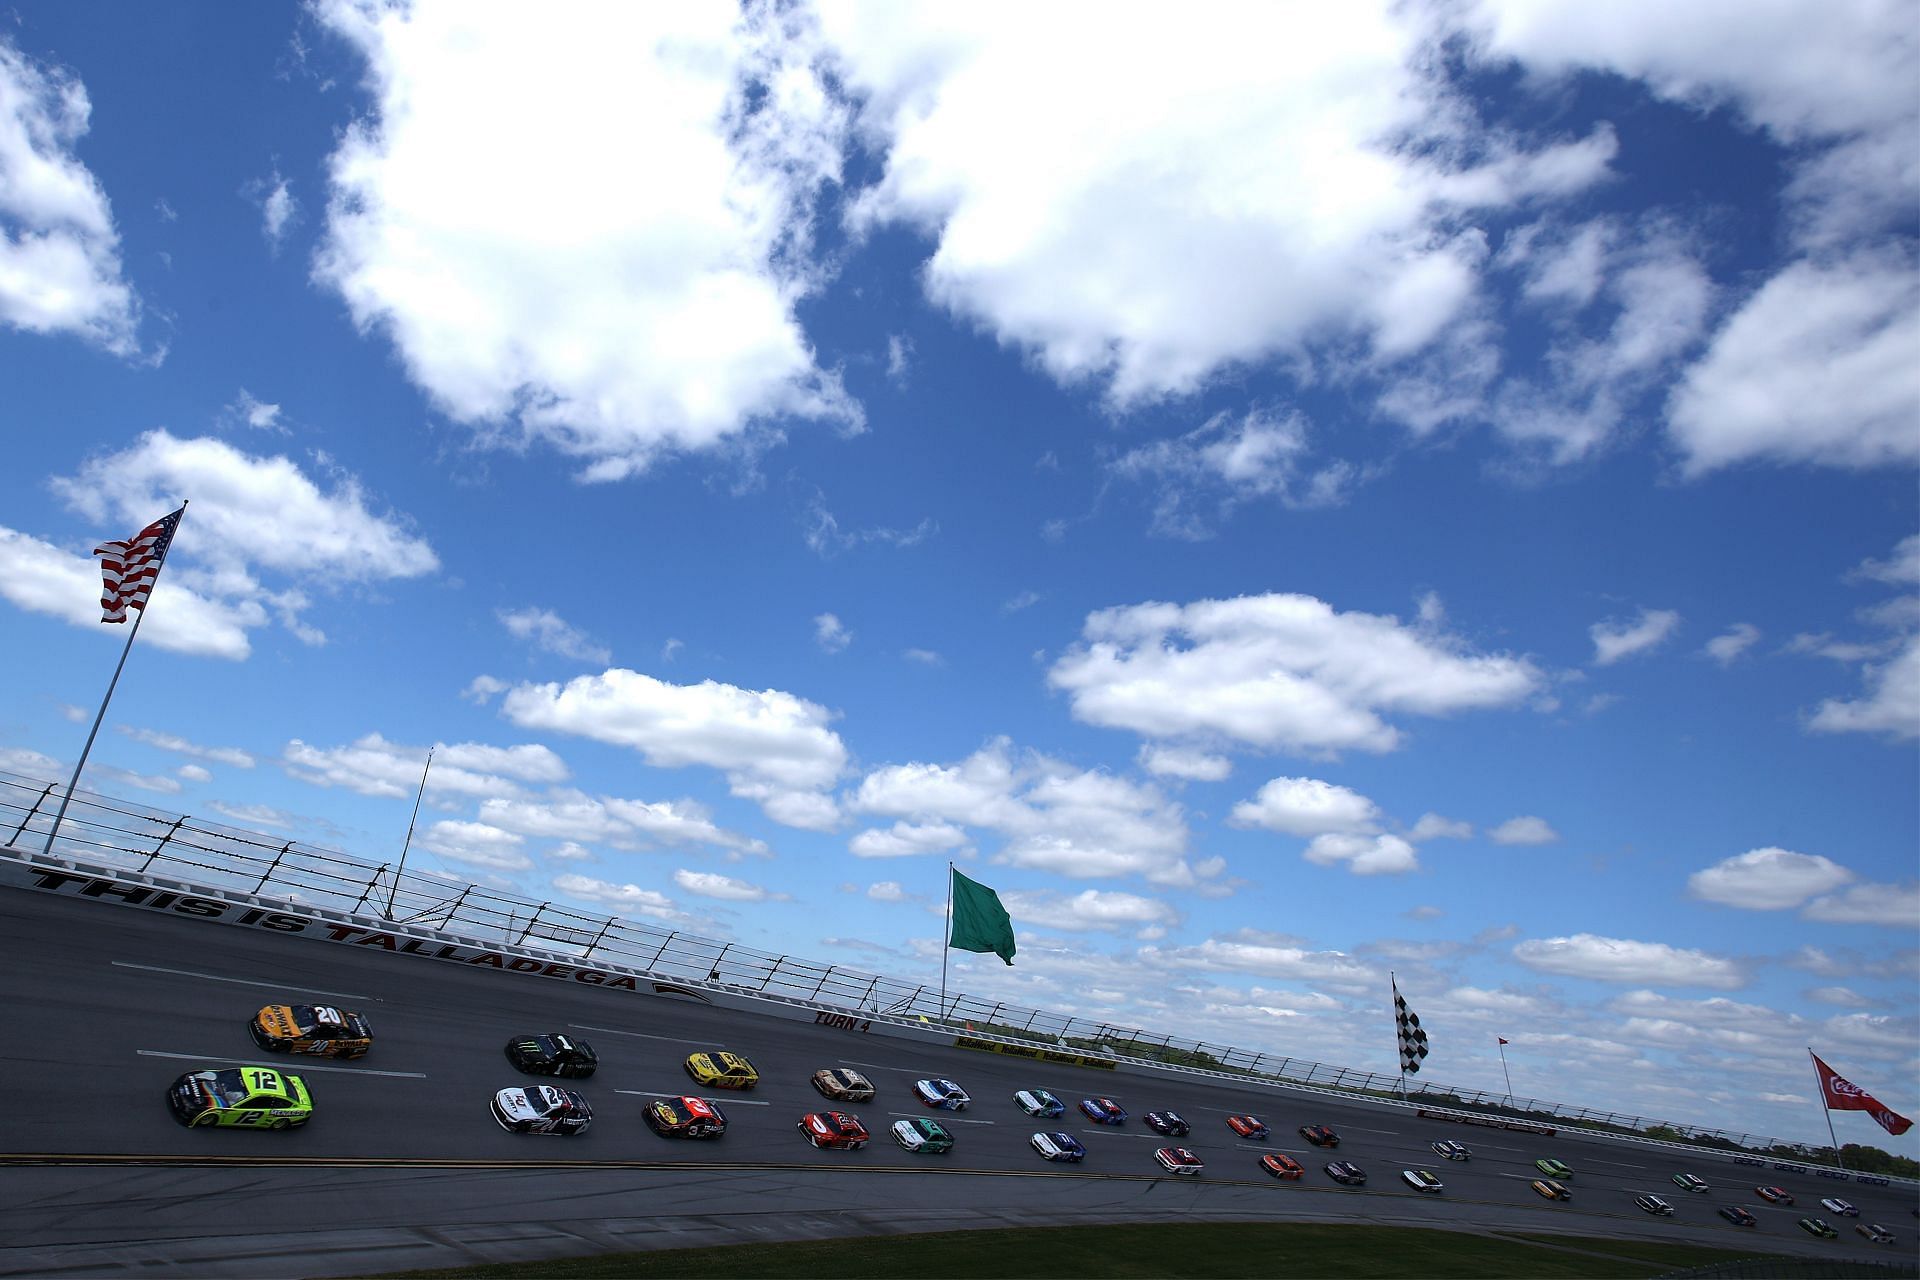 Ryan Blaney leads the field during the NASCAR Cup Series GEICO 500 at Talladega Superspeedway (Photo by Sean Gardner/Getty Images)